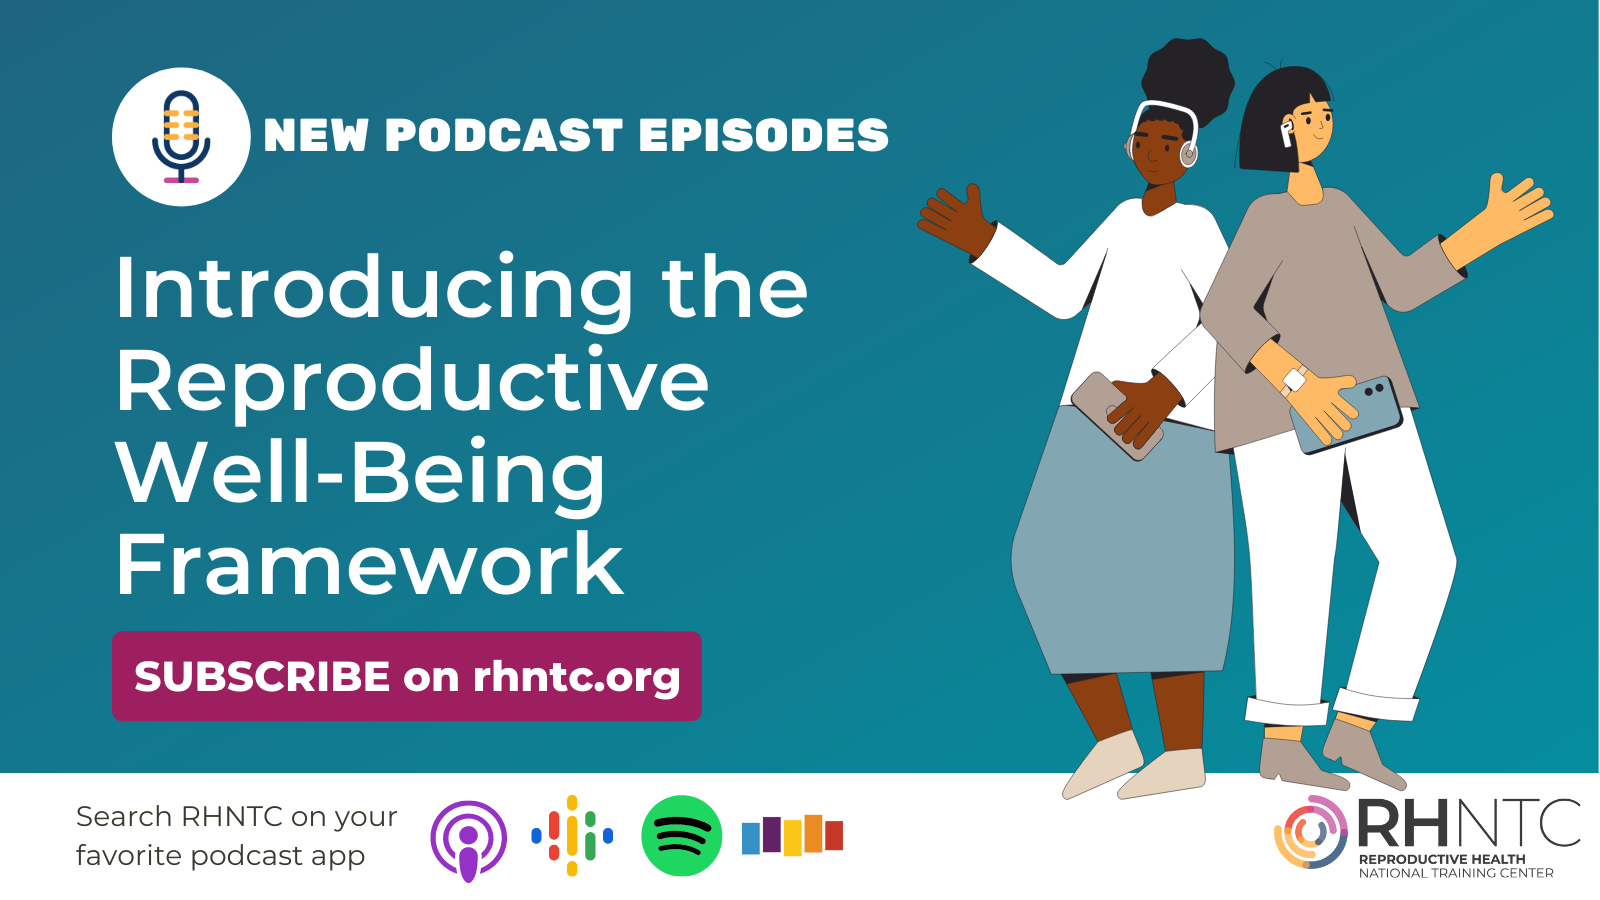 New podcast episodes: Introducing the Reproductive Well-Being Framework